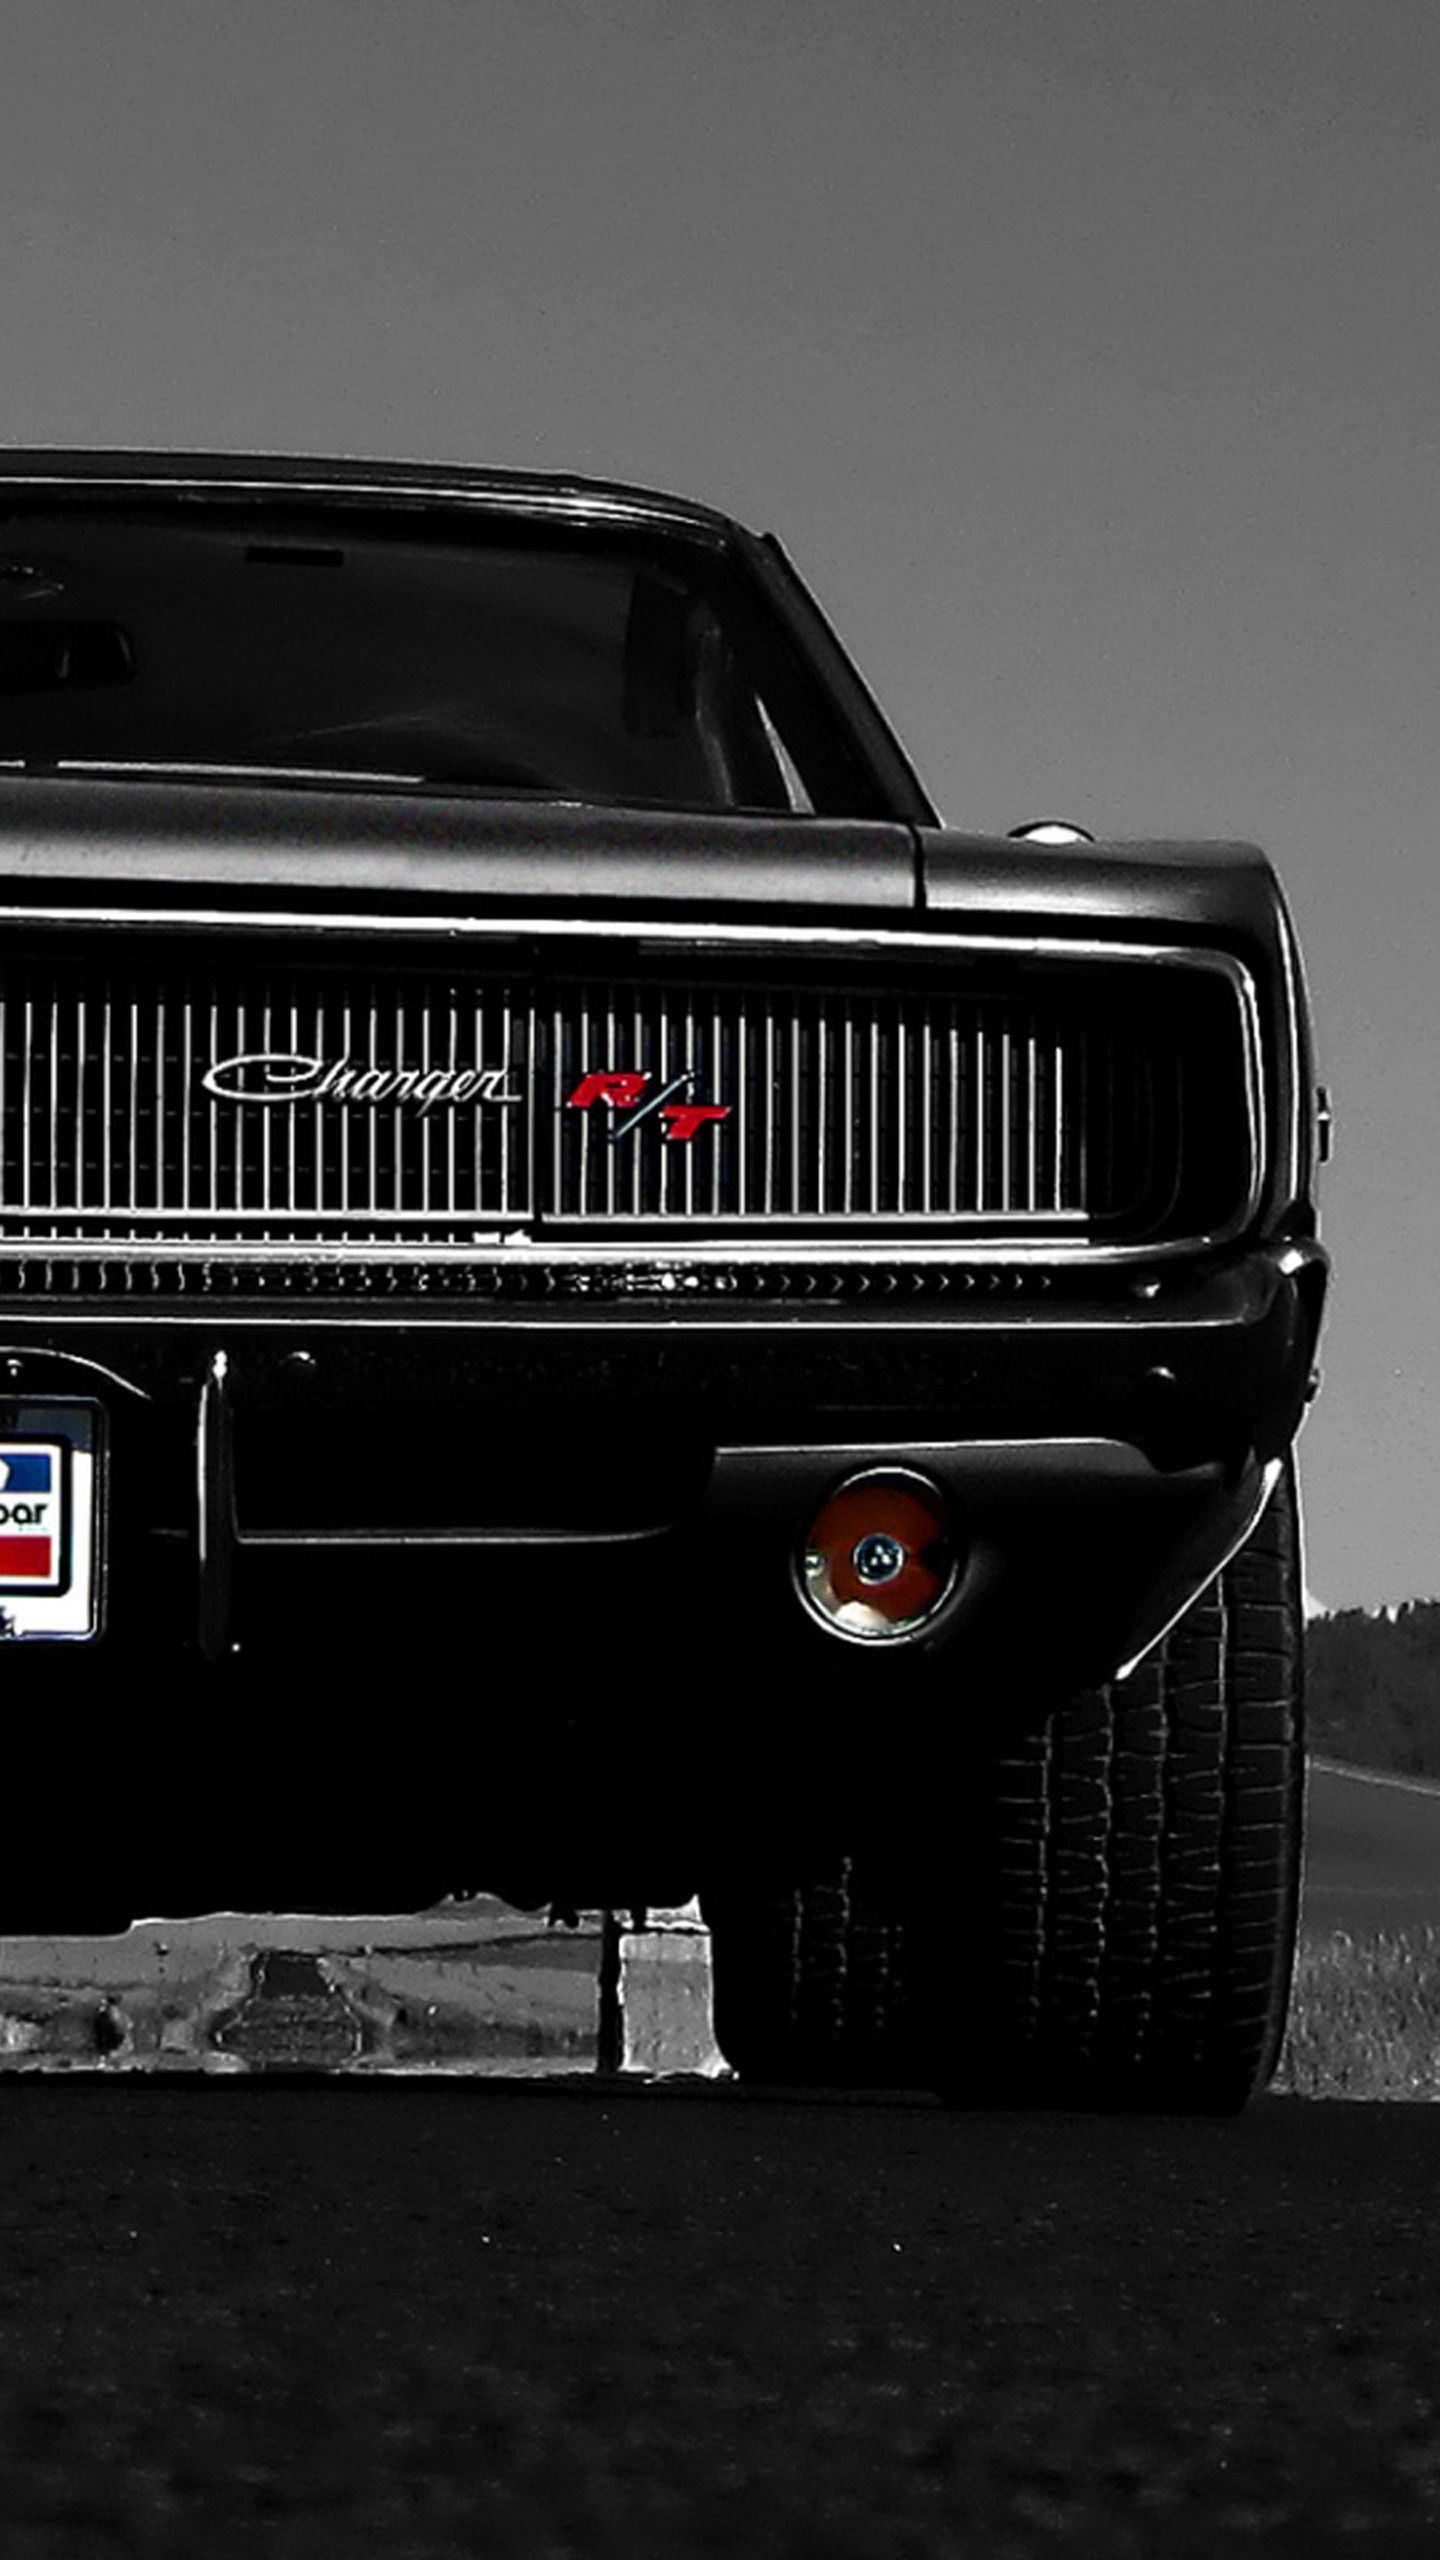 Dodge Charger Rt Samsung Galaxy Note4 Wallpaper